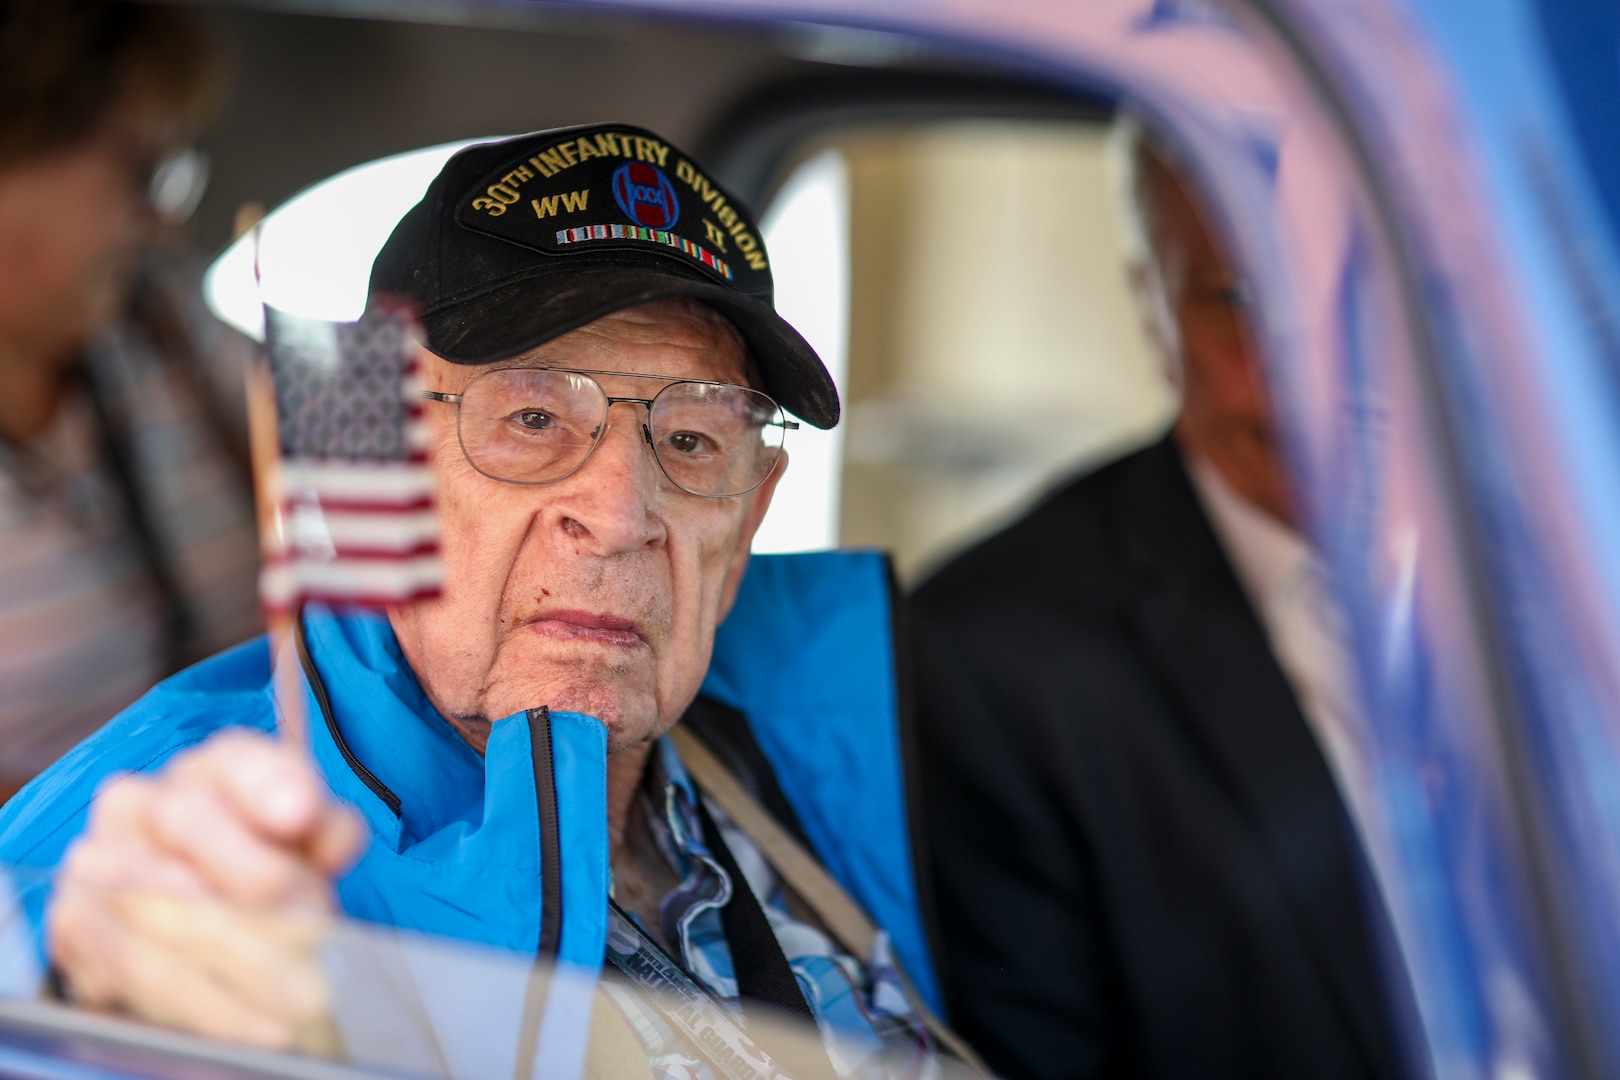 George Hamm, a WWII veteran who served with the 30th Infantry Division,  holds a flag out a window during a parade through Maastricht in the Limburg Province of the Netherlands tSept. 14, 2019, in celebration of the 75th anniversary of the liberation by 30th Infantry Division Soldiers in September 1944. North Carolina National Guard Soldiers escorted the veterans, with whom they share a unit lineage, riding in classic cars and WWII era military vehicles through the streets lined with thousands of people.